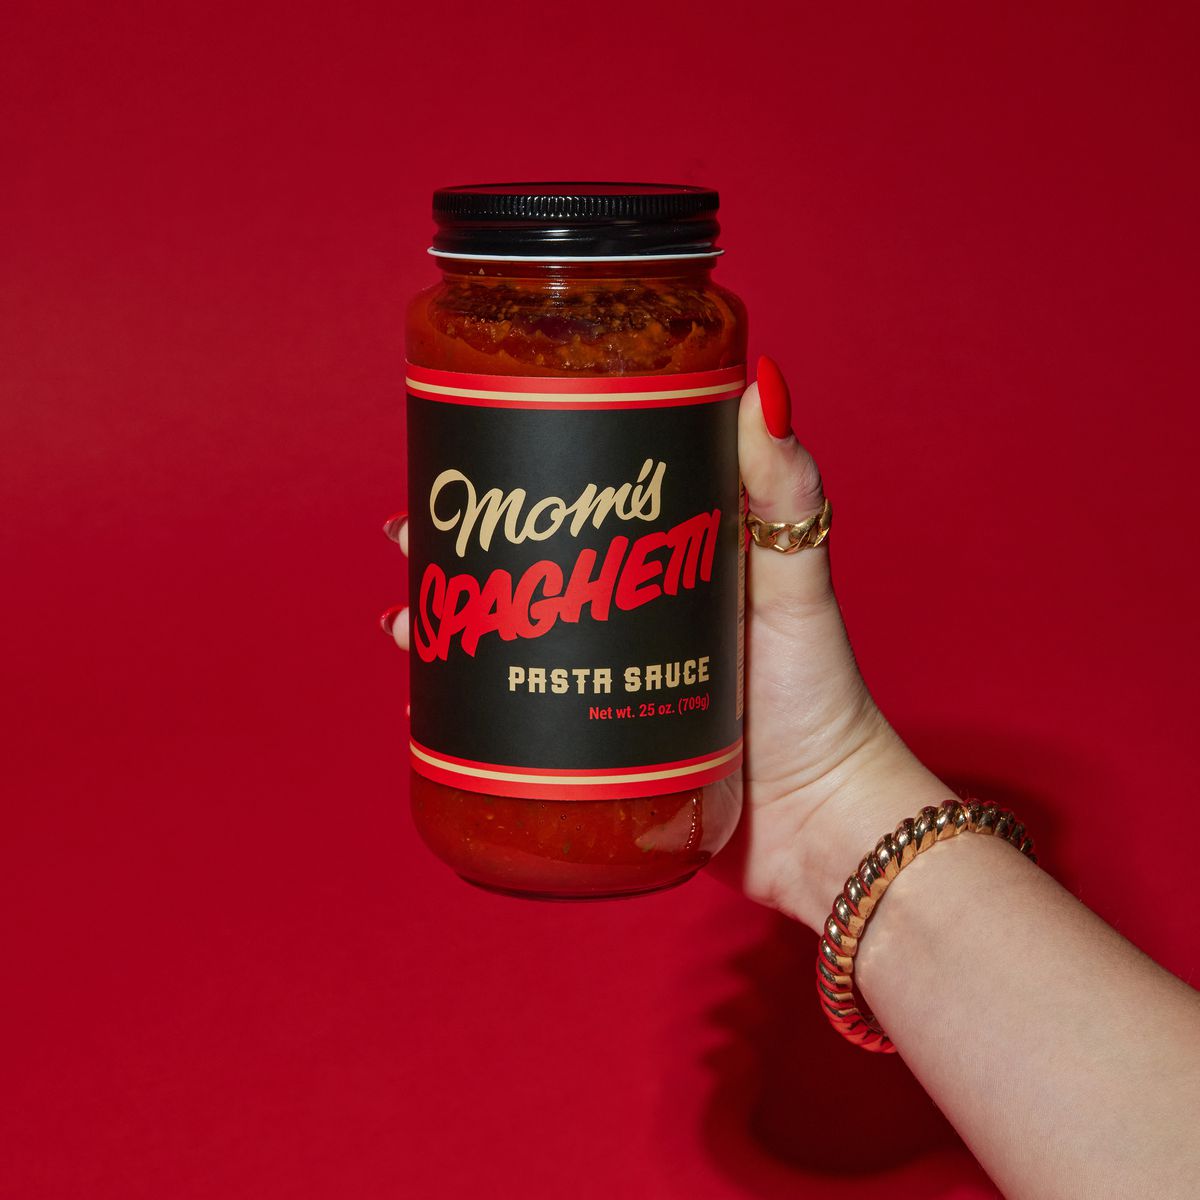 A hand with a red coffin nail on the thumb, a gold ring, and a gold bracelet on the wrist holding a jar of red sauce that says Mom’s Spaghetti Pasta Sauce.